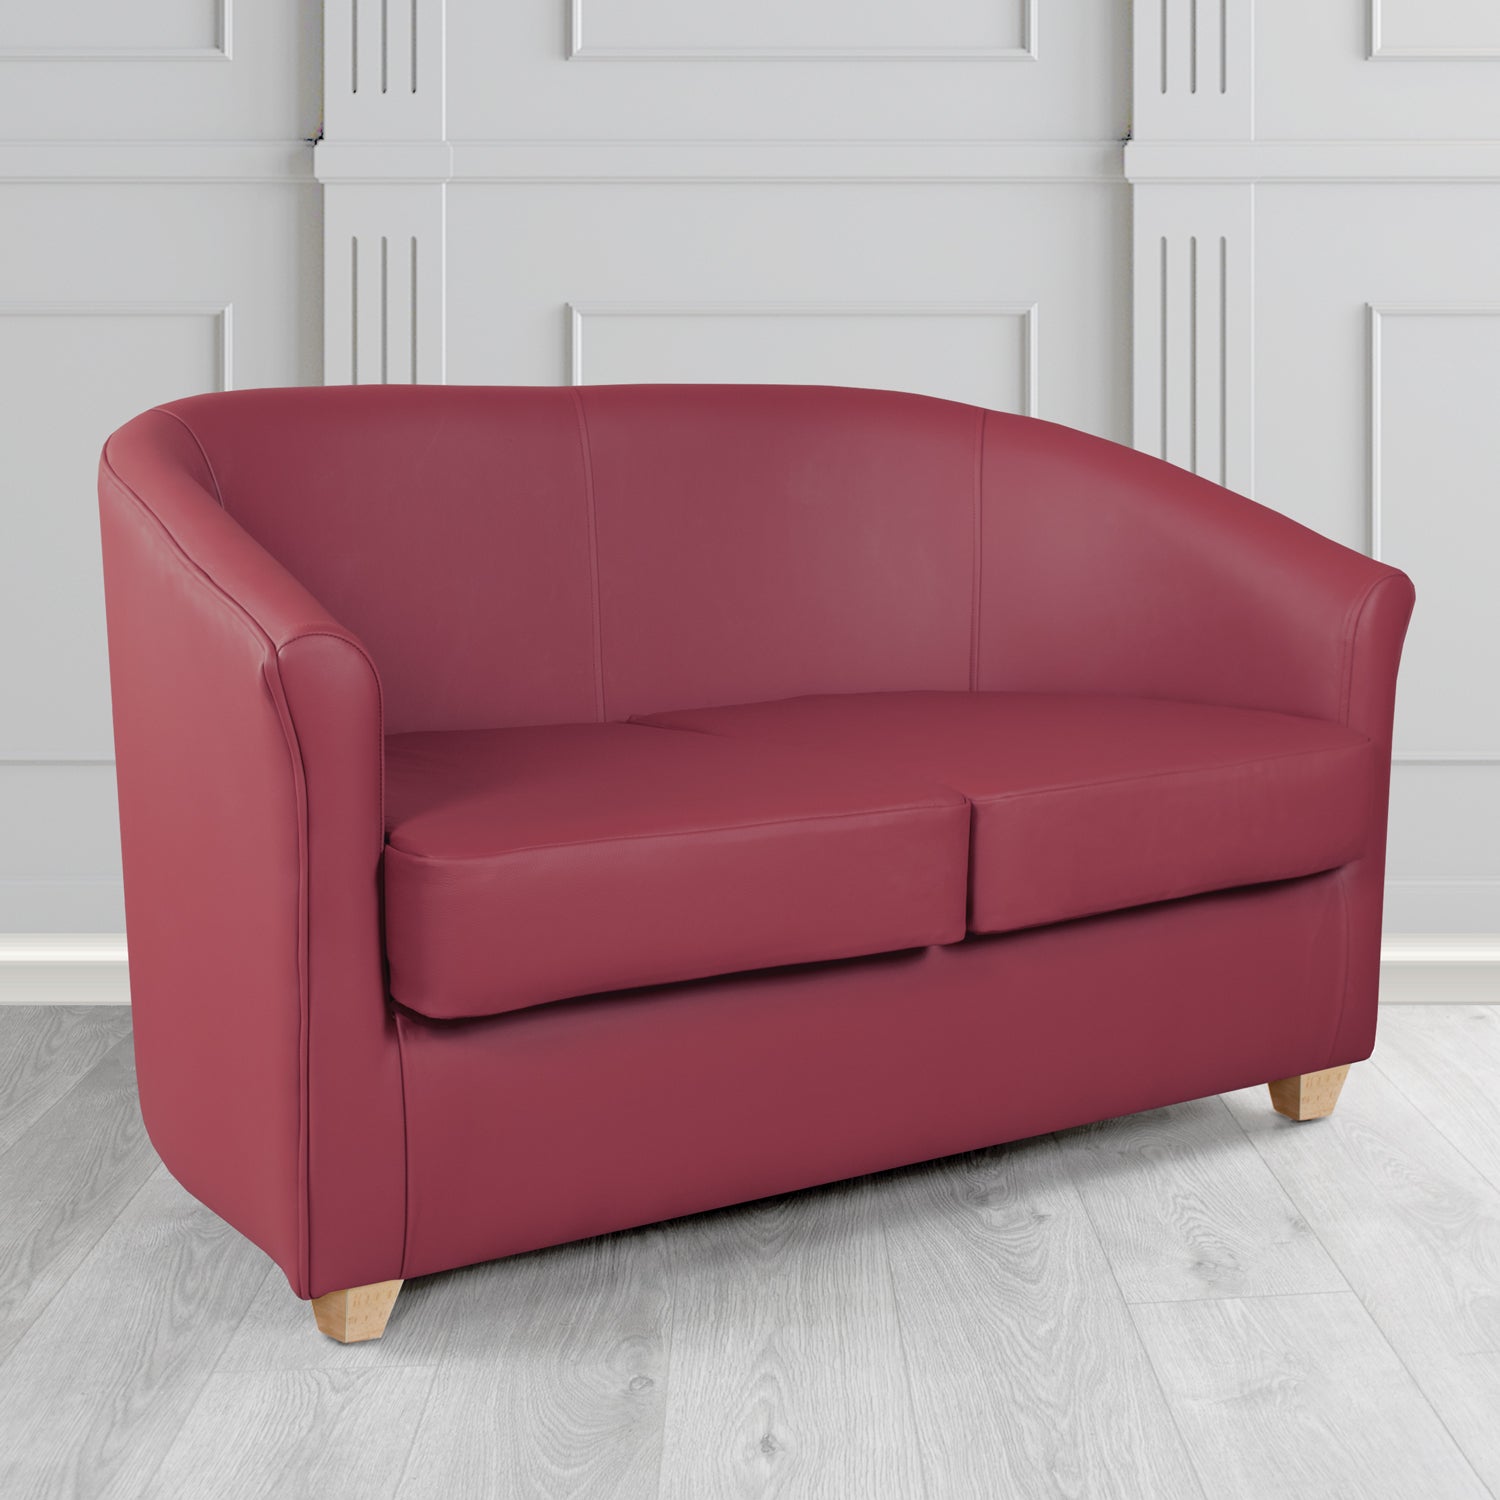 Cannes 2 Seater Tub Sofa in Just Colour Jazzberry Crib 5 Faux Leather - The Tub Chair Shop